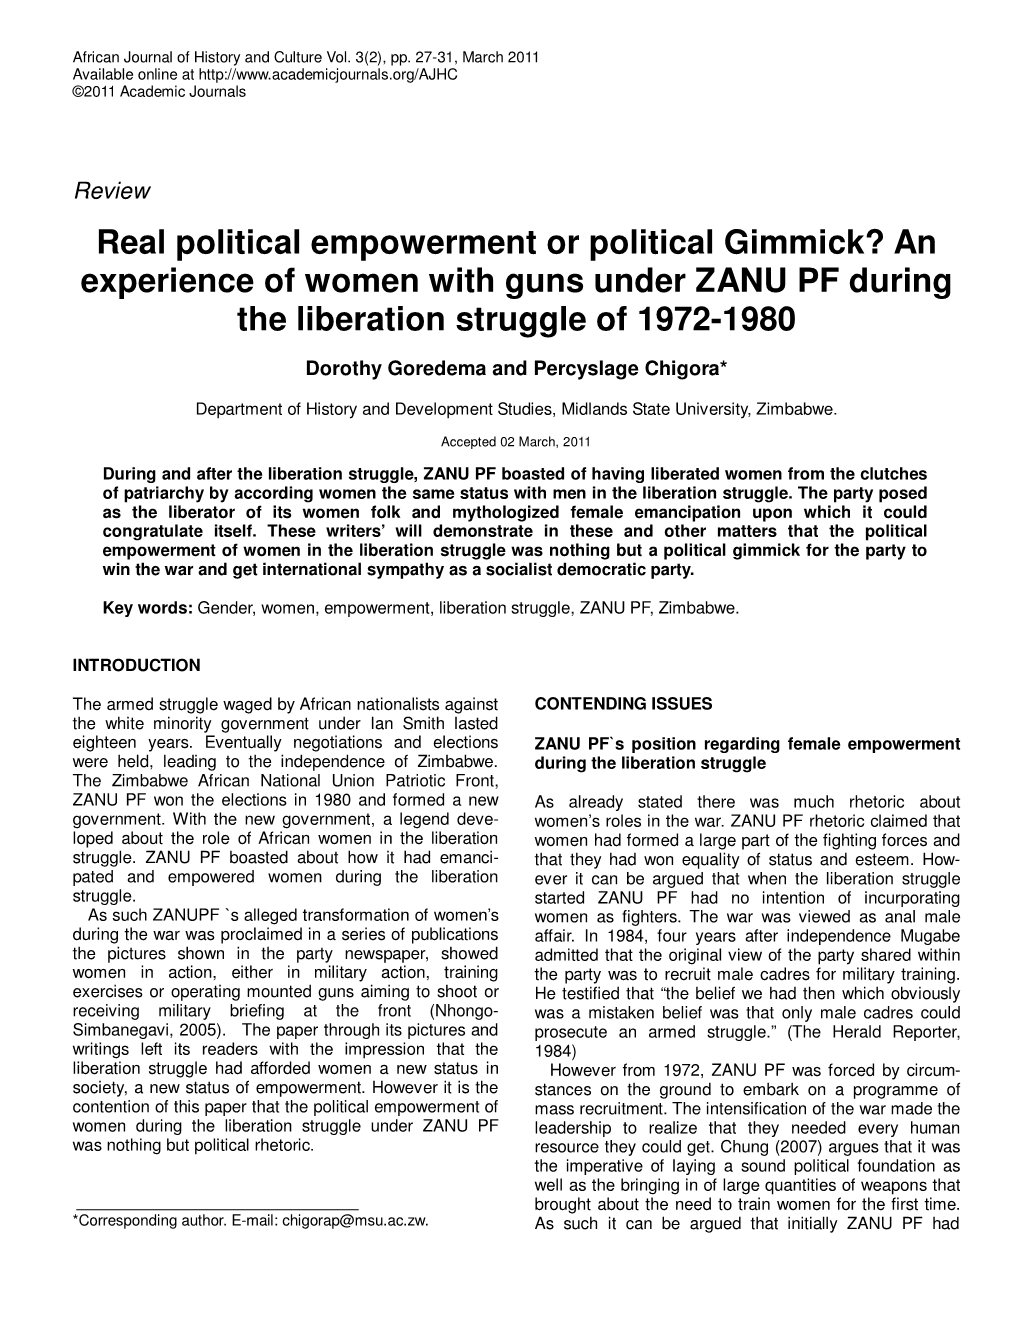 An Experience of Women with Guns Under ZANU PF During the Liberation Struggle of 1972-1980